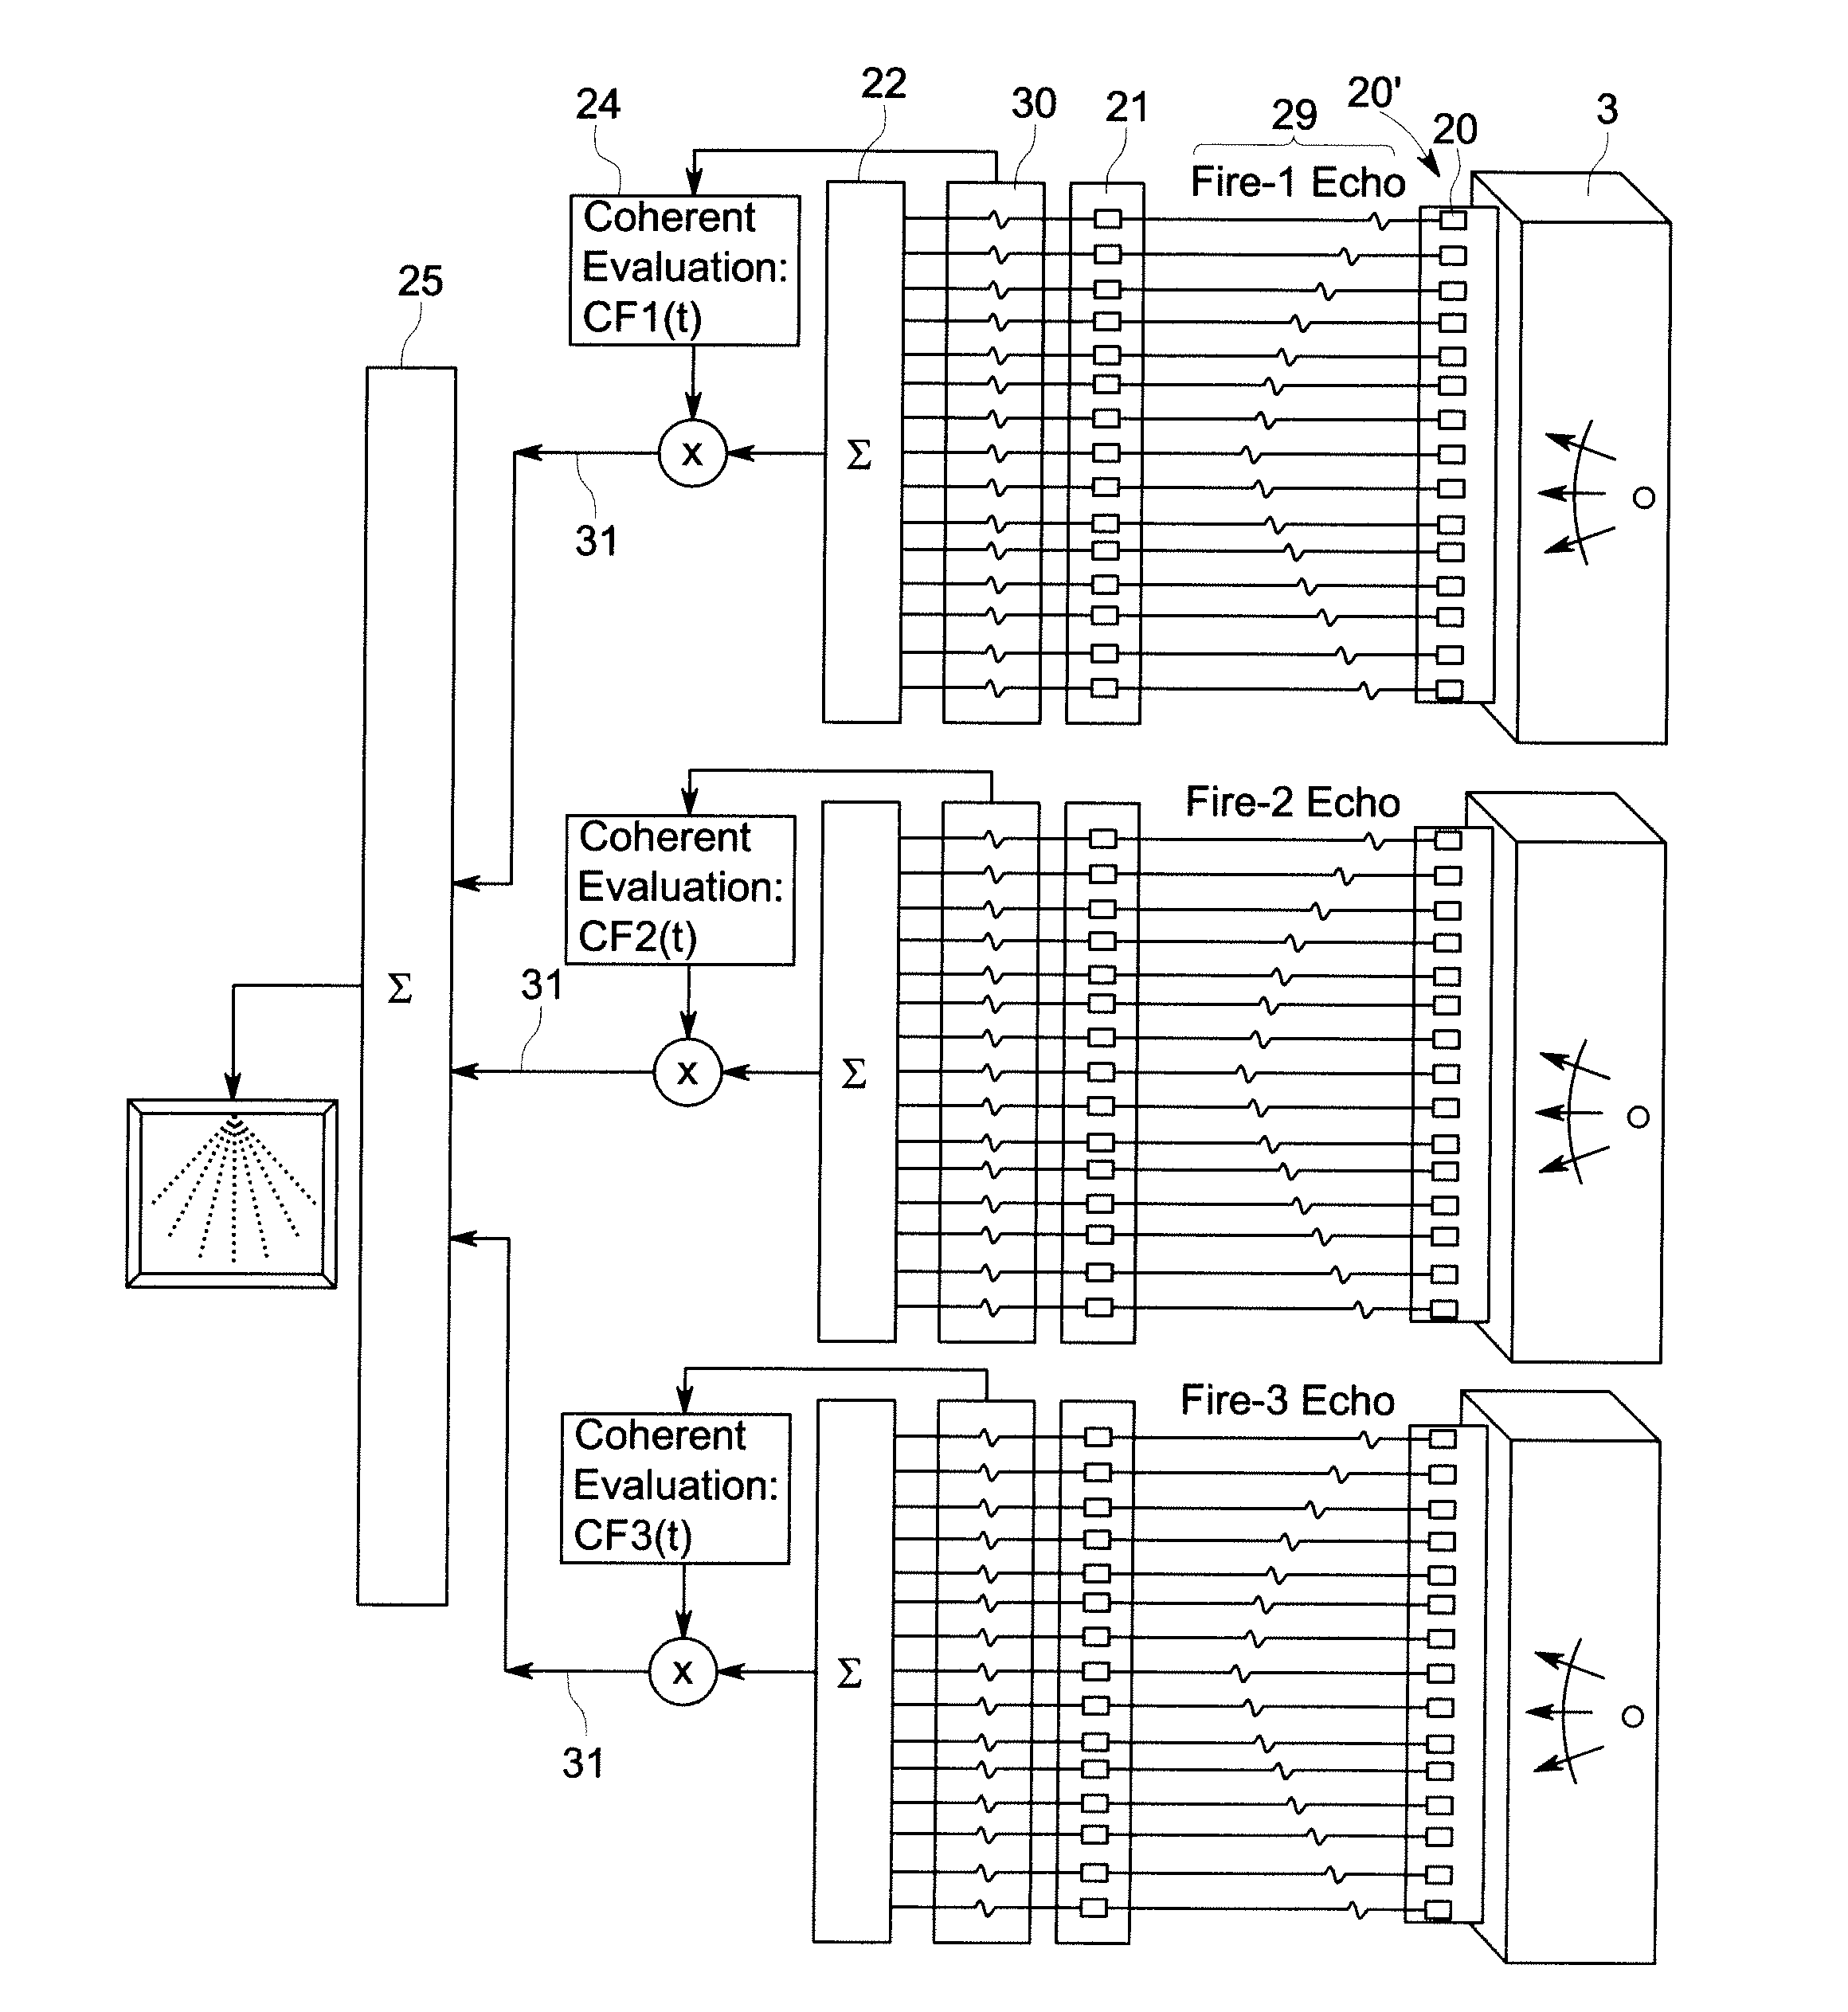 Imaging system and method